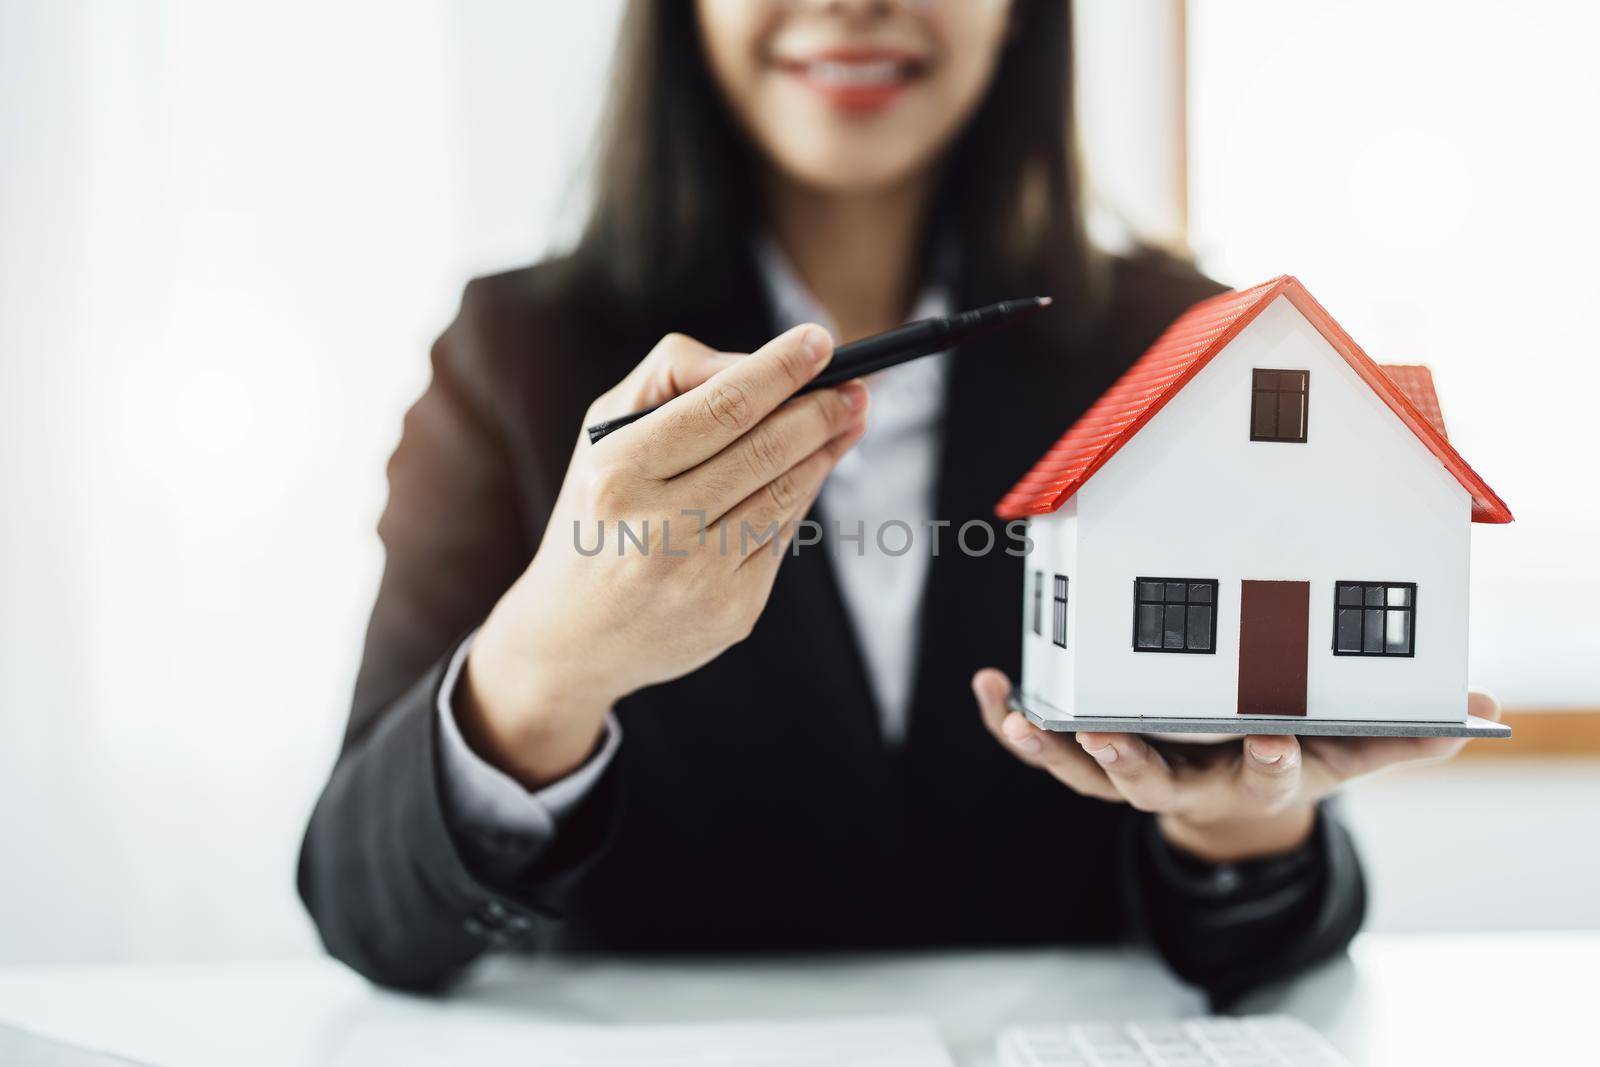 Law, agreement, contract, mortgage, woman holding a pen, pointing at a house to see the interest rate and asking for the limit to assess the risk before buying a house by Manastrong